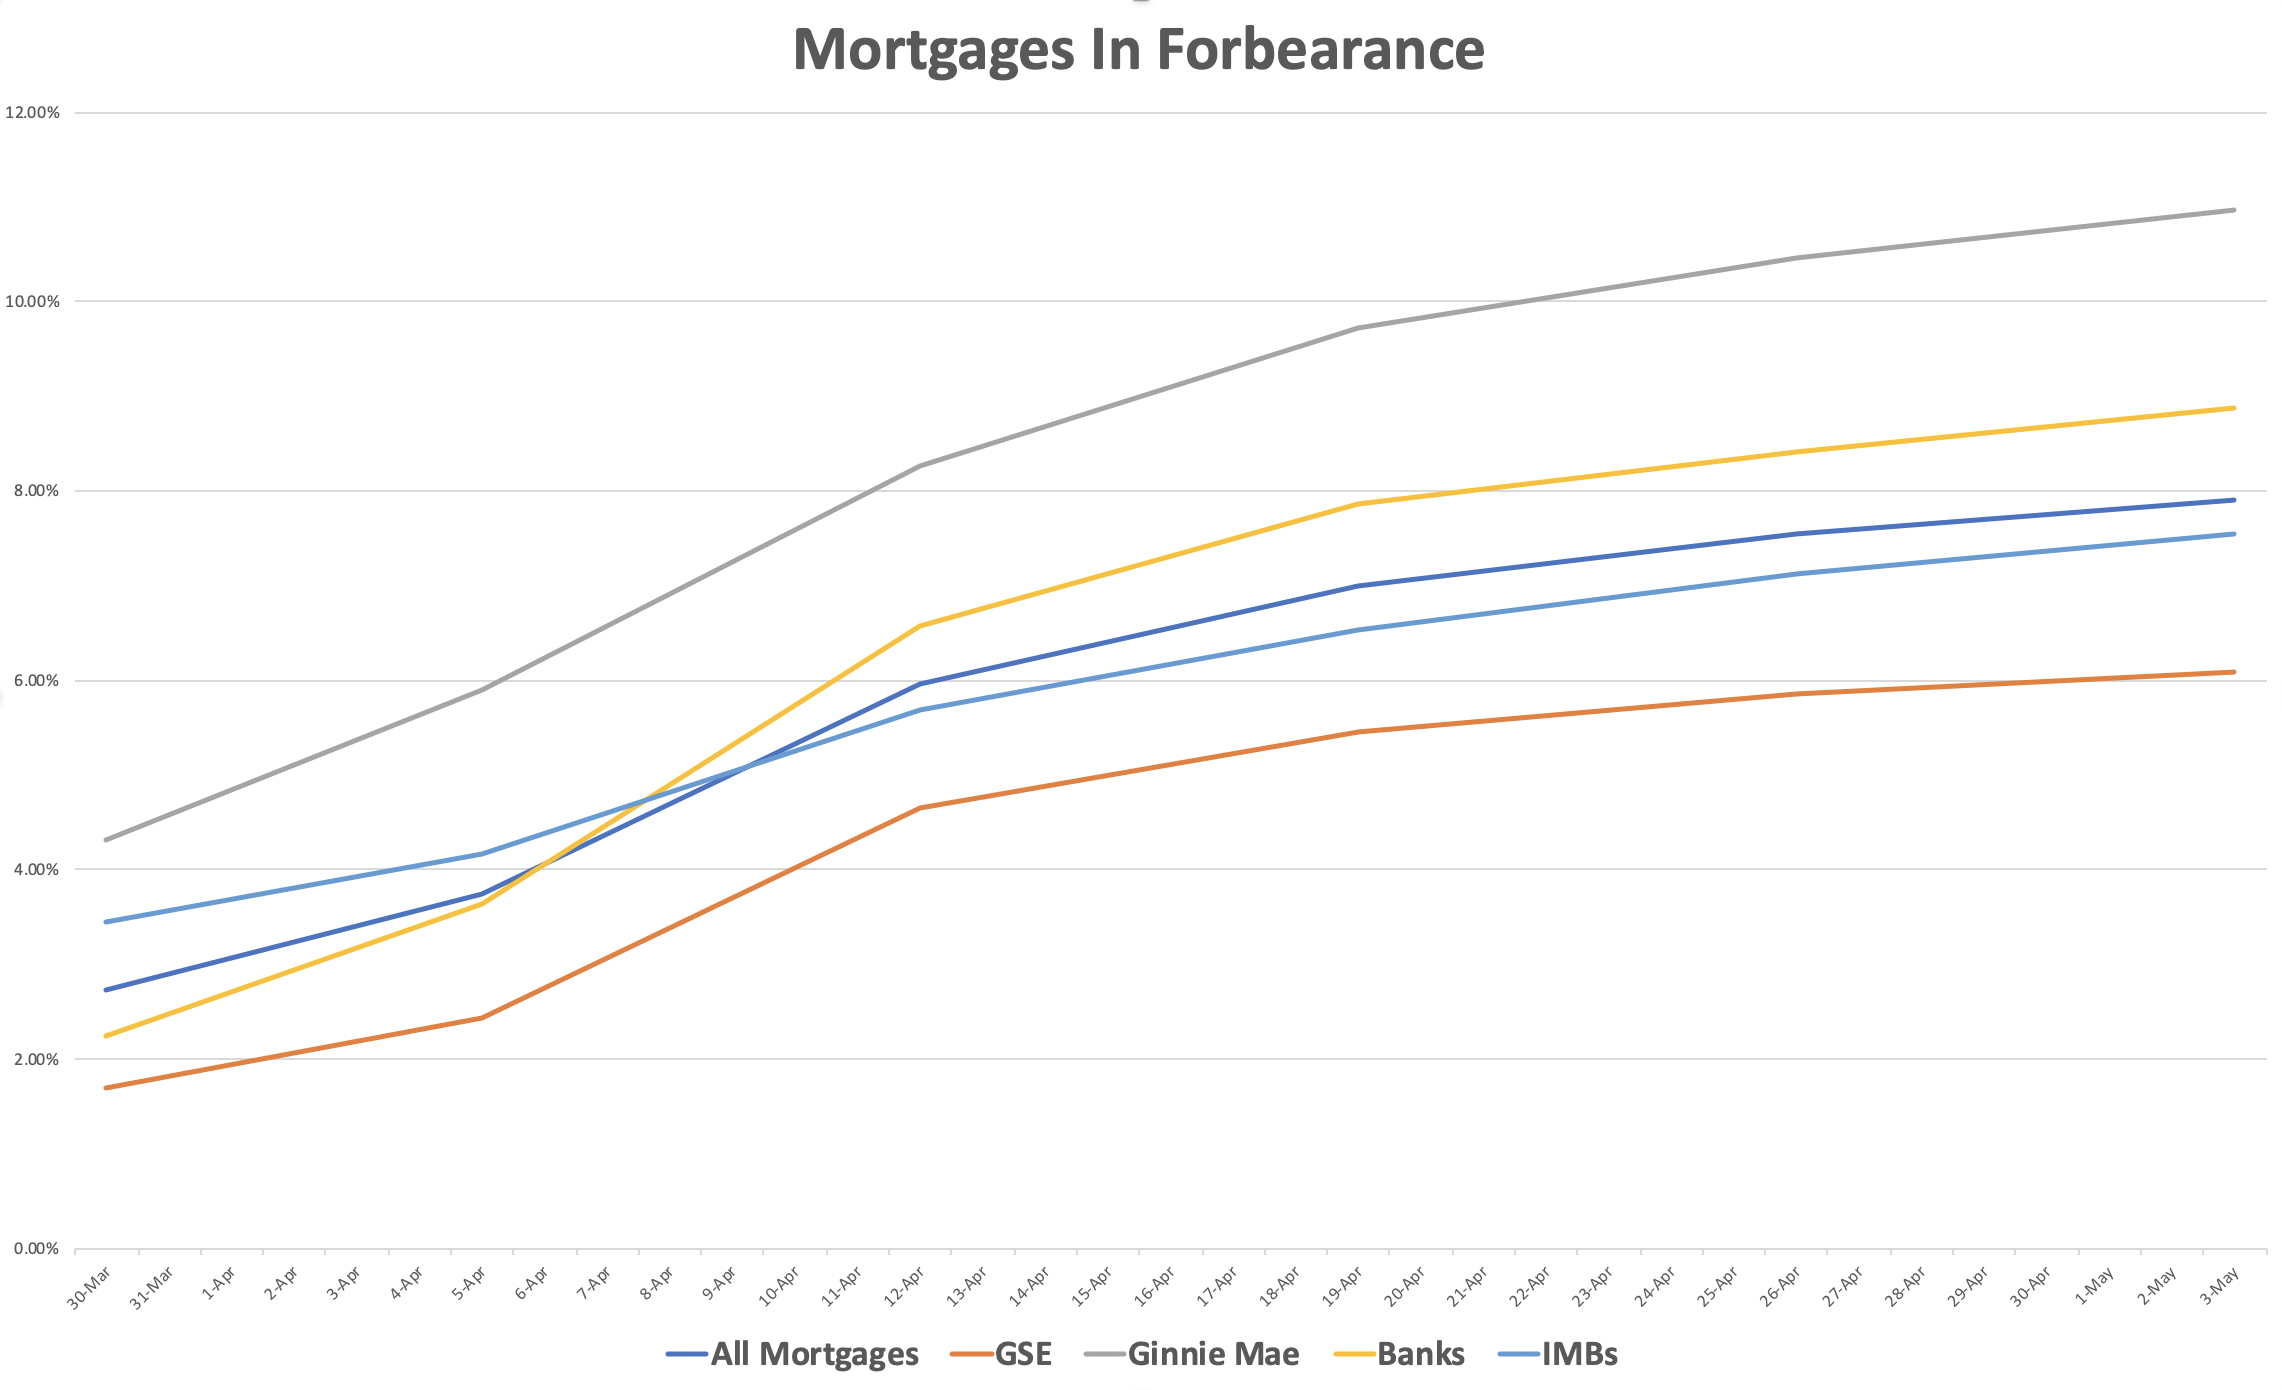 U.S. Mortgages In Forbearance Top 4 Million